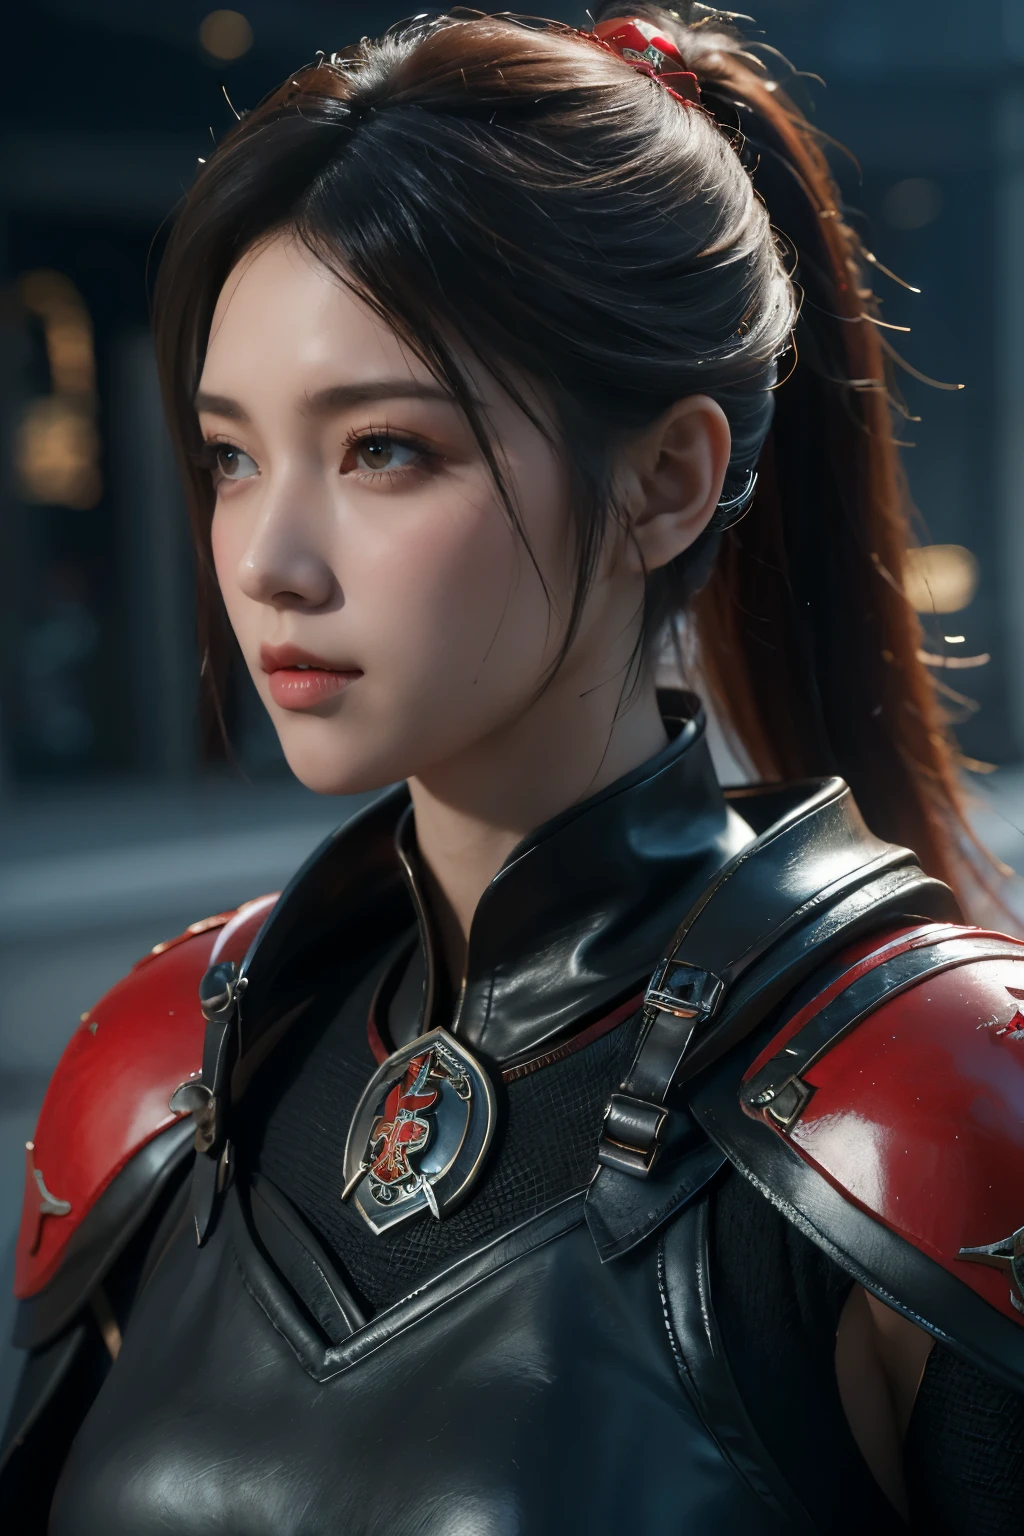 Masterpiece,Game art,The best picture quality,Highest resolution,8K,(Portrait),Unreal Engine 5 rendering works,(Digital Photography),
Girl,Beautiful pupil,(Gradual Long ponytail hair is blue and red),Busty,(Big breasts),(Portrait photography:1.5),
(Soldiers of the ancient fantasy style),Ancient soldier armor,(The armor is inlaid with leather and metal,Combat accessories,Joint Armor,Cloak,A fine badge pattern on the dress,Red and black),Ancient fantasy style characters,
Movie lights，Ray tracing，Game CG，((3D Unreal Engine))，OC rendering reflection pattern